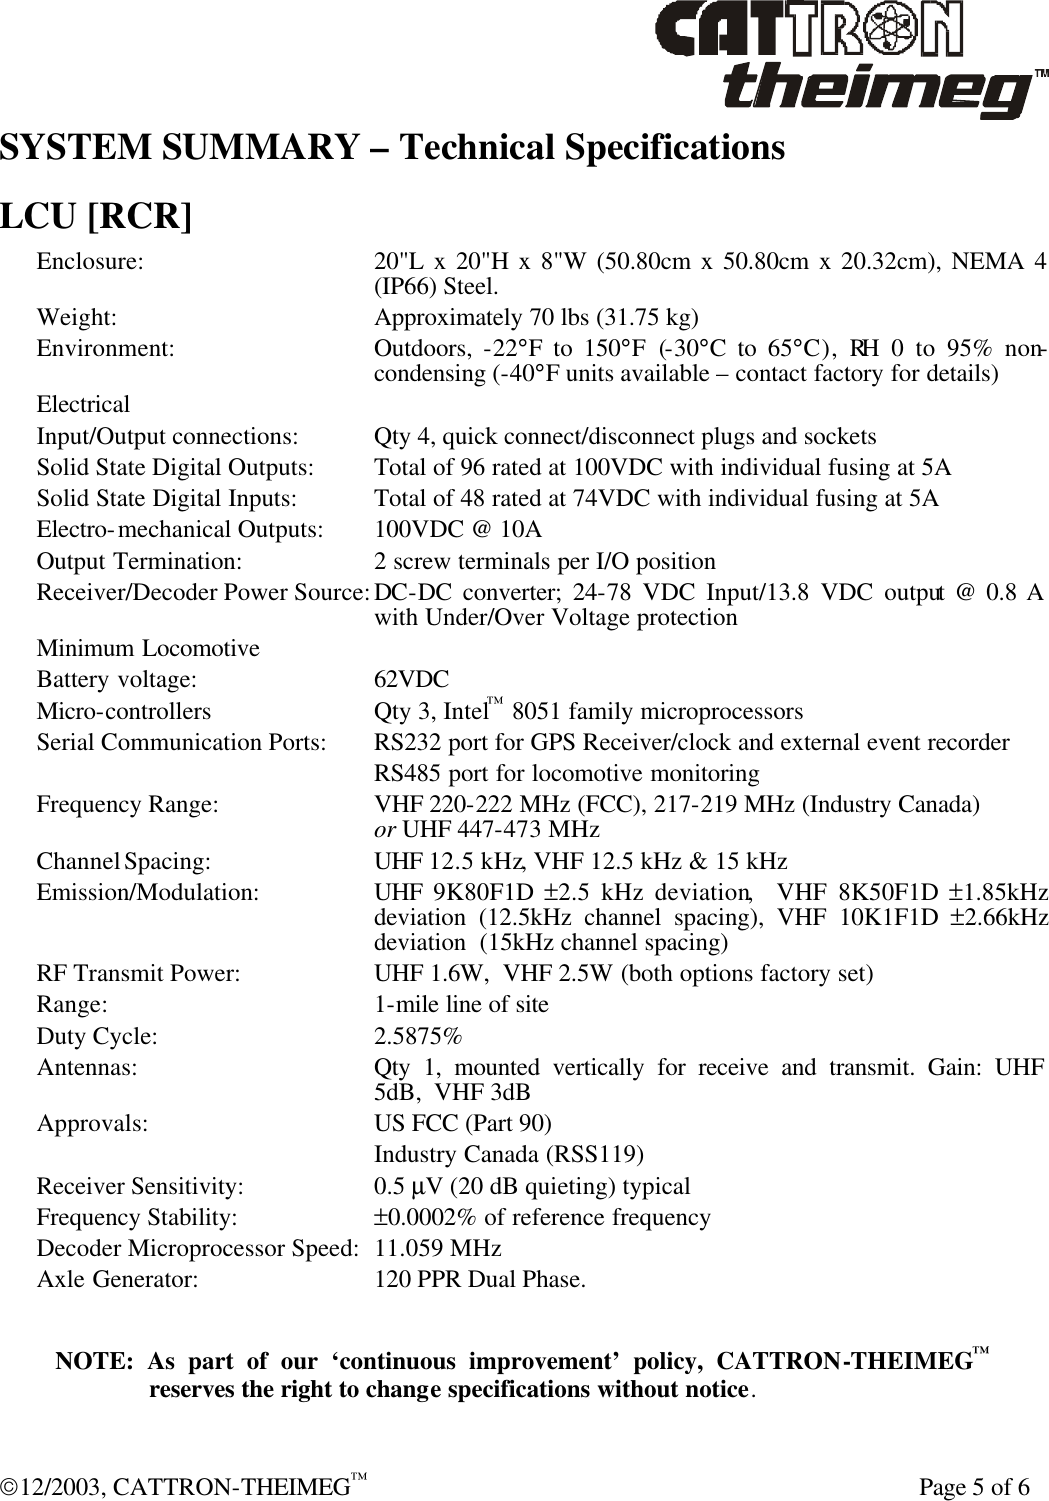  12/2003, CATTRON-THEIMEG™    Page 5 of 6 SYSTEM SUMMARY – Technical Specifications  LCU [RCR] Enclosure: 20&quot;L x 20&quot;H x 8&quot;W (50.80cm x 50.80cm x 20.32cm), NEMA 4 (IP66) Steel.  Weight: Approximately 70 lbs (31.75 kg) Environment: Outdoors,  -22°F to 150°F (-30°C to 65°C), RH 0 to 95% non-condensing (-40°F units available – contact factory for details) Electrical  Input/Output connections: Qty 4, quick connect/disconnect plugs and sockets Solid State Digital Outputs: Total of 96 rated at 100VDC with individual fusing at 5A Solid State Digital Inputs: Total of 48 rated at 74VDC with individual fusing at 5A Electro-mechanical Outputs:  100VDC @ 10A Output Termination: 2 screw terminals per I/O position Receiver/Decoder Power Source: DC-DC converter; 24-78 VDC Input/13.8 VDC output @ 0.8 A with Under/Over Voltage protection Minimum Locomotive Battery voltage: 62VDC Micro-controllers Qty 3, Intel™ 8051 family microprocessors Serial Communication Ports: RS232 port for GPS Receiver/clock and external event recorder  RS485 port for locomotive monitoring Frequency Range: VHF 220-222 MHz (FCC), 217-219 MHz (Industry Canada)     or UHF 447-473 MHz Channel Spacing:  UHF 12.5 kHz, VHF 12.5 kHz &amp; 15 kHz Emission/Modulation: UHF  9K80F1D  ±2.5 kHz deviation,  VHF 8K50F1D  ±1.85kHz  deviation (12.5kHz channel spacing), VHF 10K1F1D  ±2.66kHz deviation  (15kHz channel spacing) RF Transmit Power: UHF 1.6W,  VHF 2.5W (both options factory set) Range:   1-mile line of site Duty Cycle: 2.5875% Antennas: Qty 1, mounted vertically for receive and transmit. Gain: UHF 5dB,  VHF 3dB Approvals: US FCC (Part 90)  Industry Canada (RSS119) Receiver Sensitivity:  0.5 µV (20 dB quieting) typical Frequency Stability: ±0.0002% of reference frequency Decoder Microprocessor Speed: 11.059 MHz Axle Generator: 120 PPR Dual Phase.  NOTE: As part of our ‘continuous improvement’ policy, CATTRON-THEIMEG™ reserves the right to change specifications without notice. 